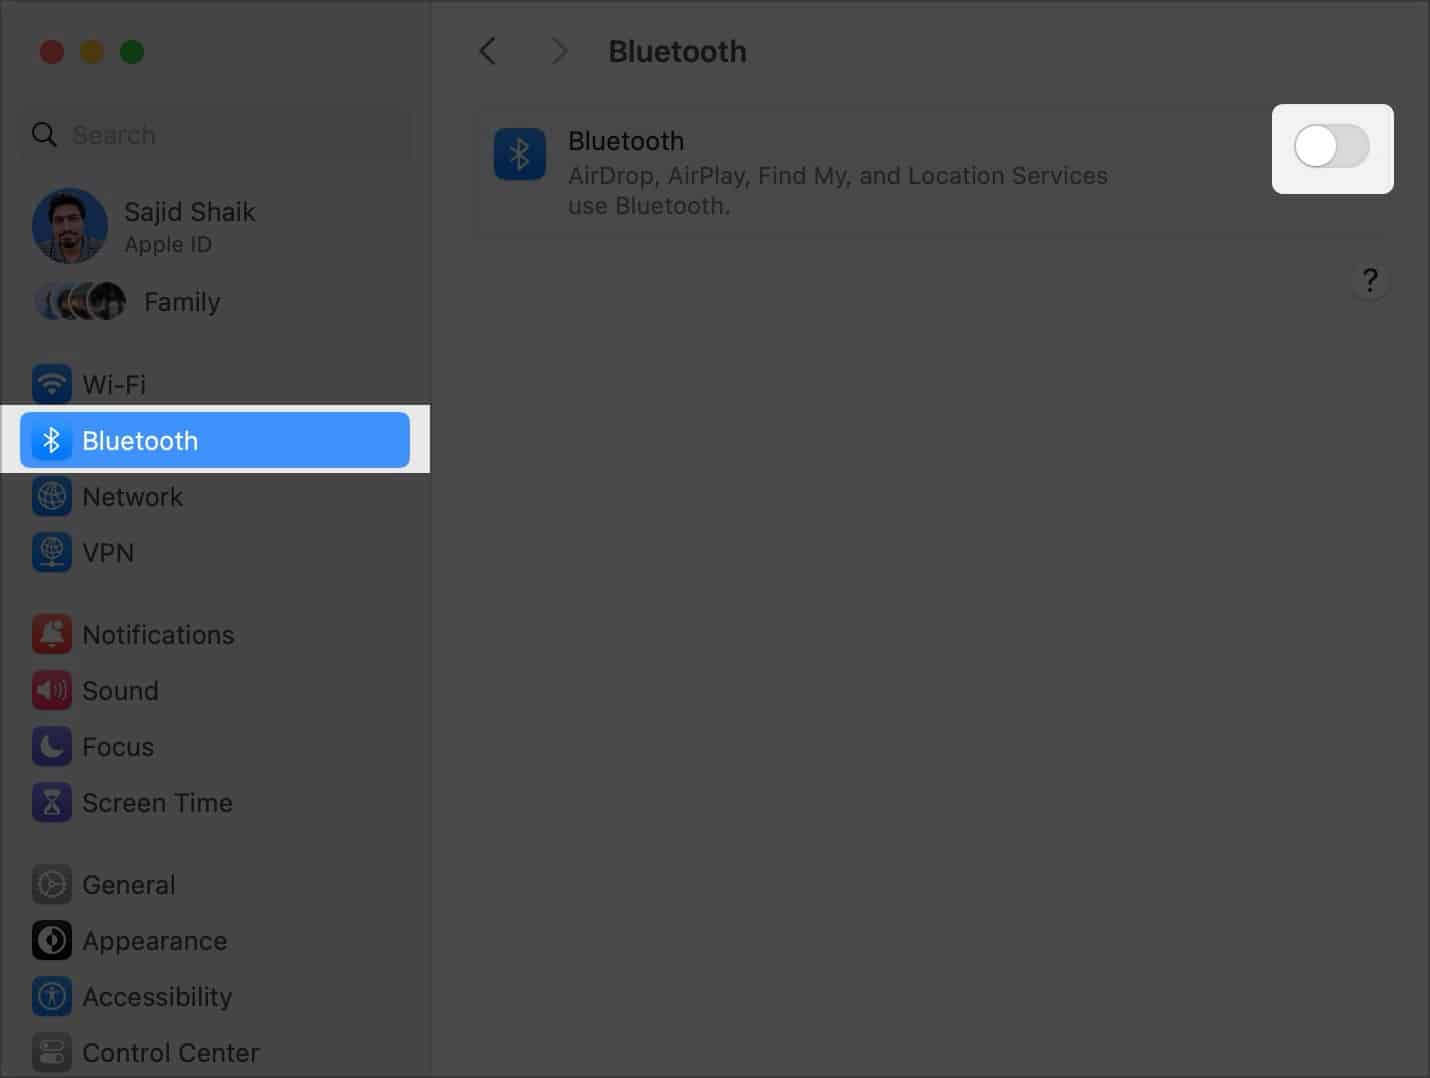 Go to Bluetooth from System Settings and toggle on Bluetooth